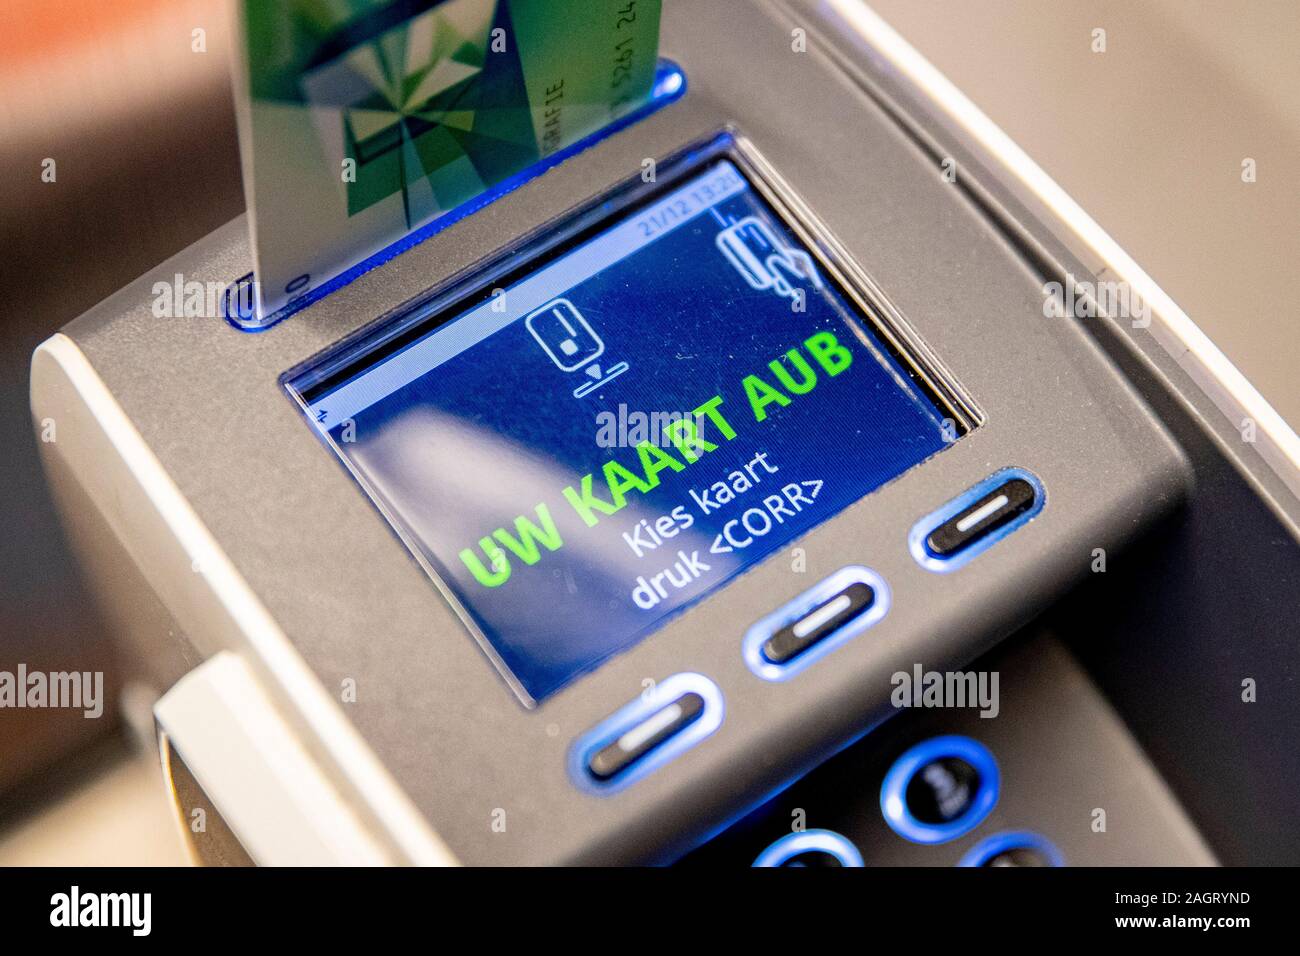 Rotterdam, Netherlands. 21st Dec, 2019. ROTTERDAM, Lijnbaan, 21-12-2019, Contactless card payments. PIN payments will be debited directly from your bank account, also during the weekends and holidays. Credit: Pro Shots/Alamy Live News Stock Photo